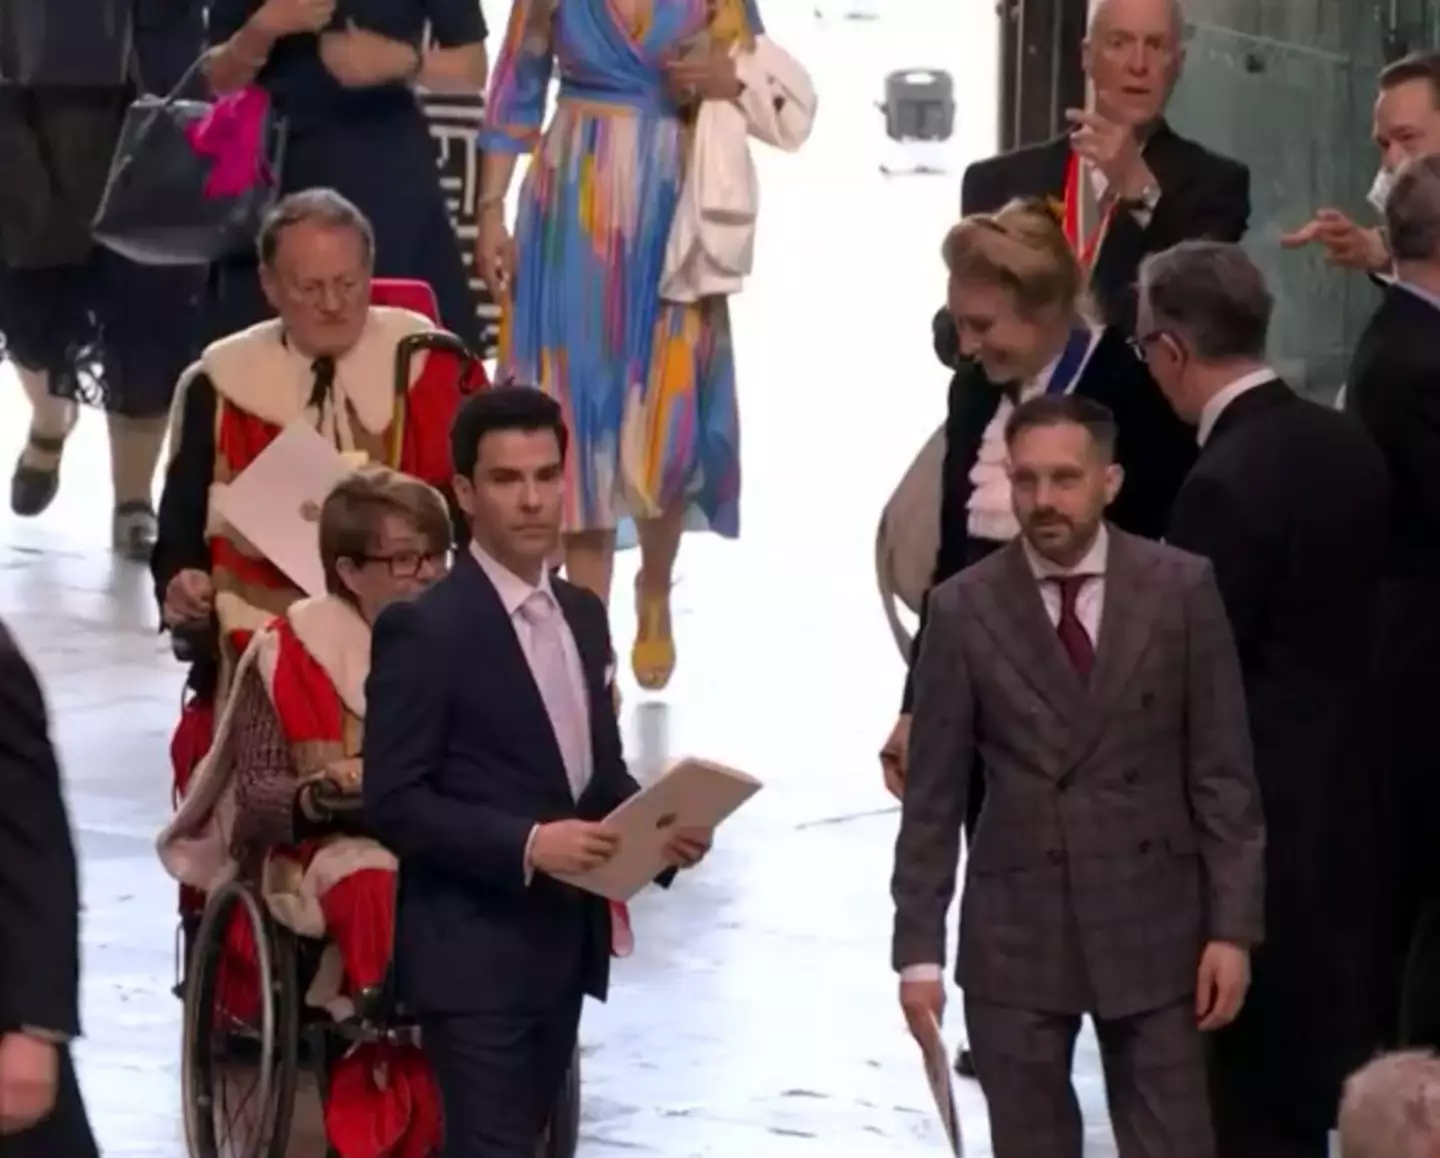 Dynamo was spotted amongst the crowds of guests arriving at Westminster Abbey.